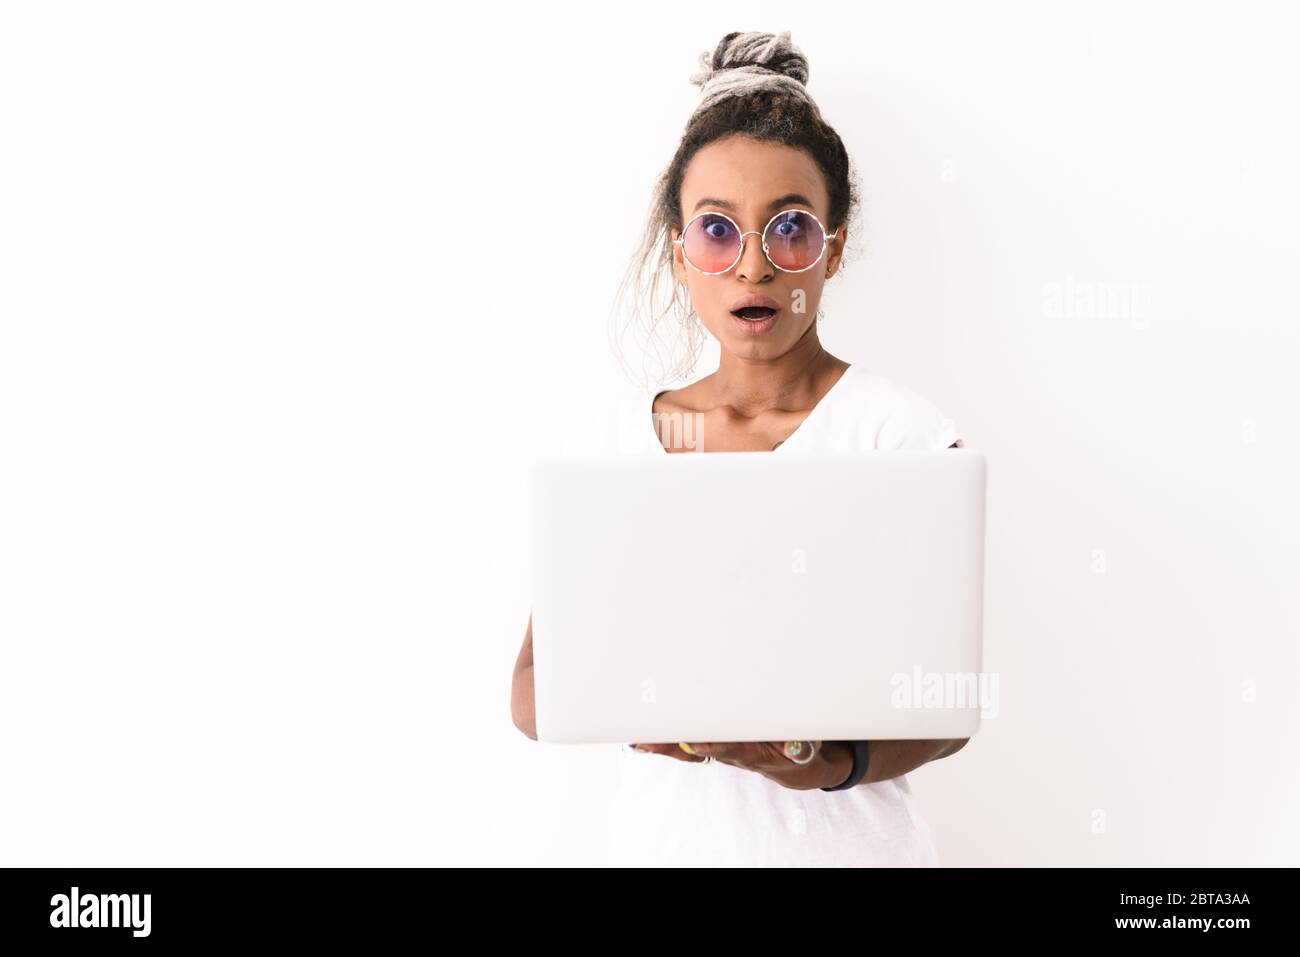 Image of a shocked emotional young african woman with dreads posing isolated over white wall background using laptop computer. Stock Photo